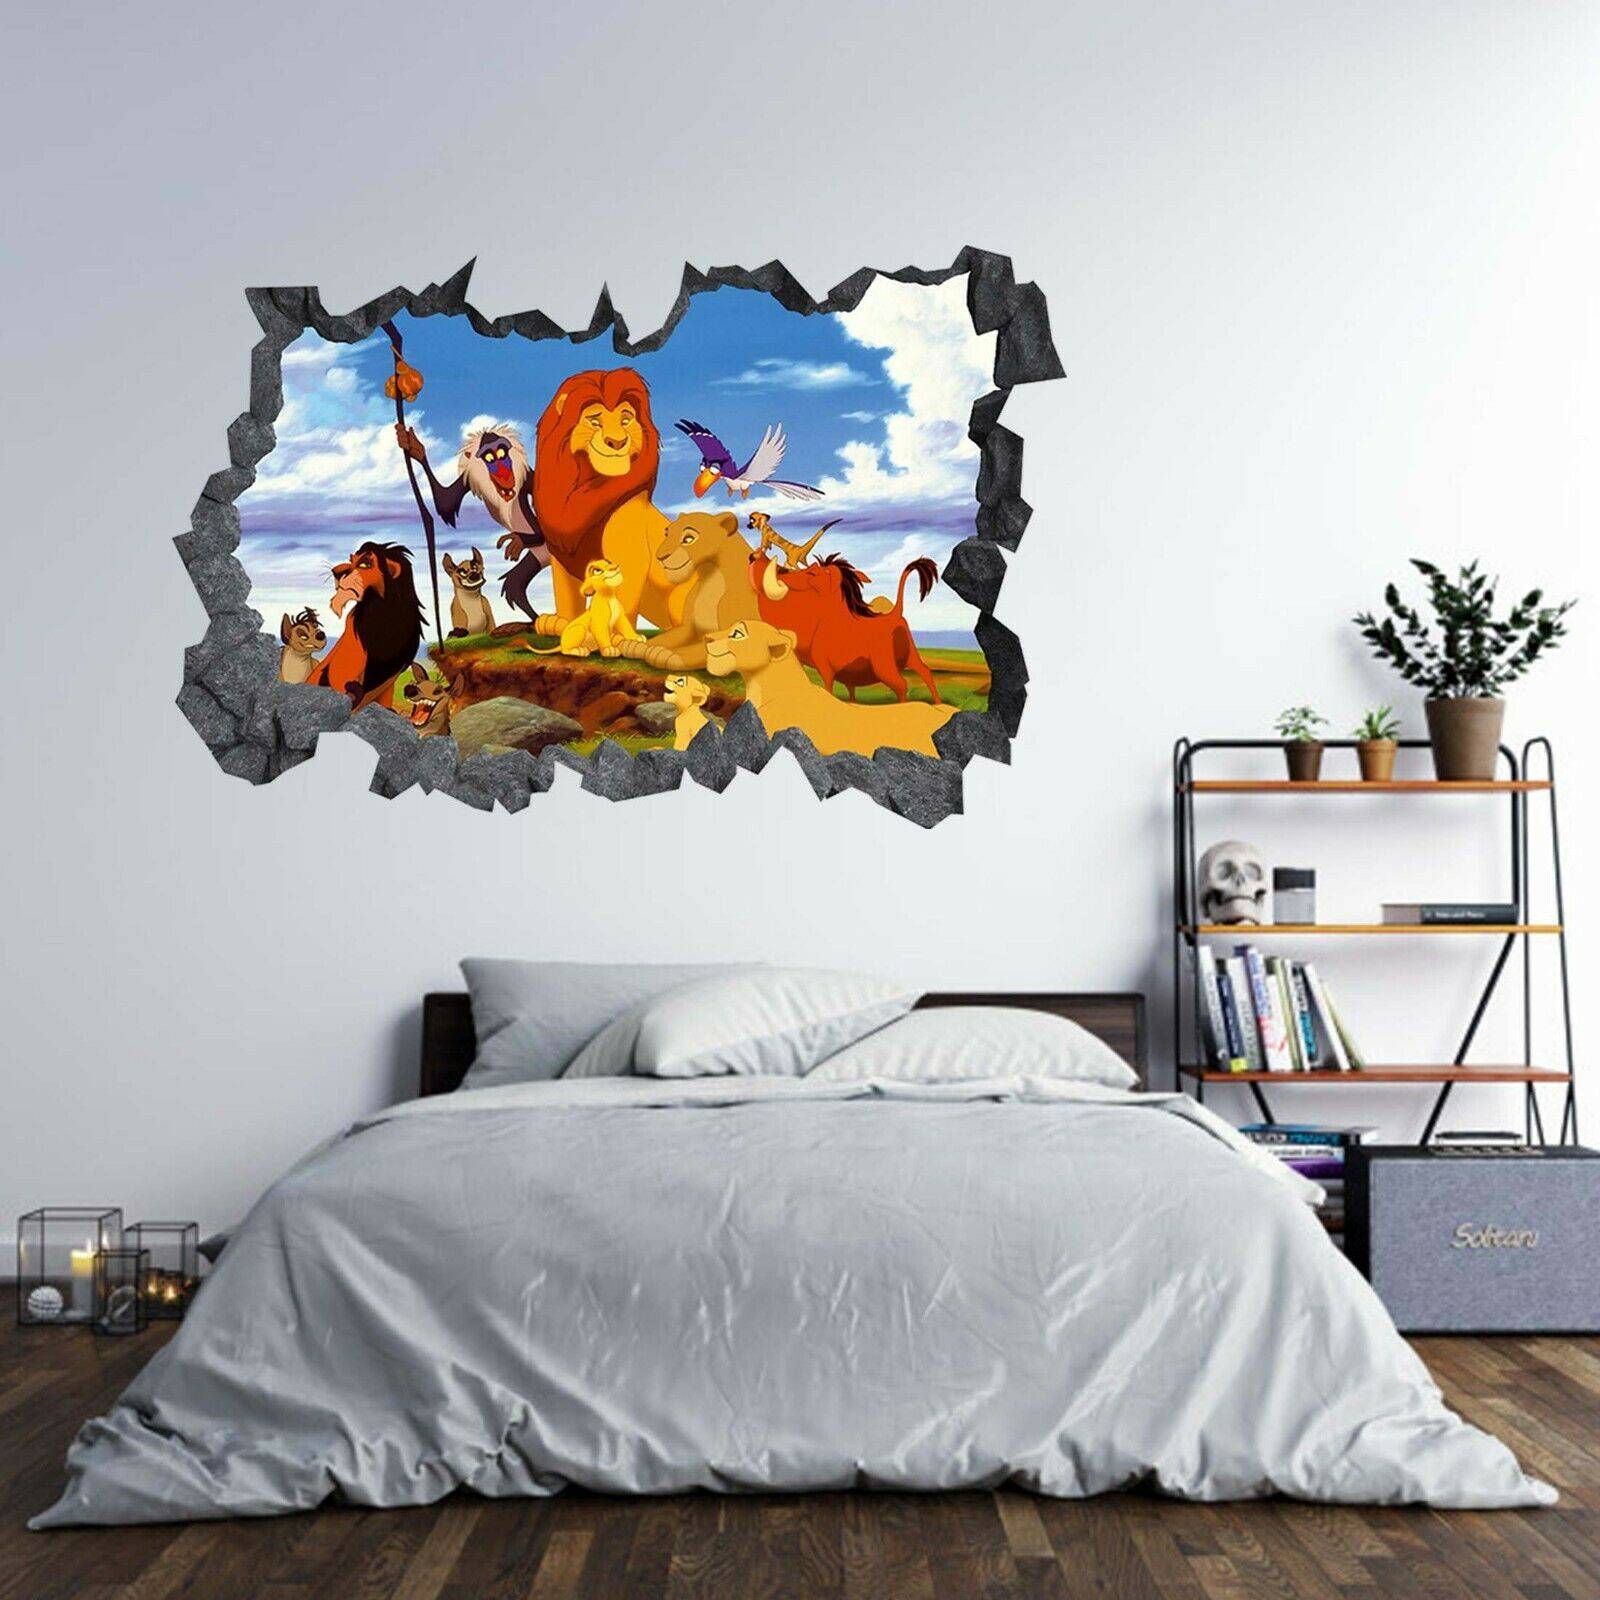 Lion King Characters 3D Hole in The Wall  Effect Wall Sticker Art Decal Mural 